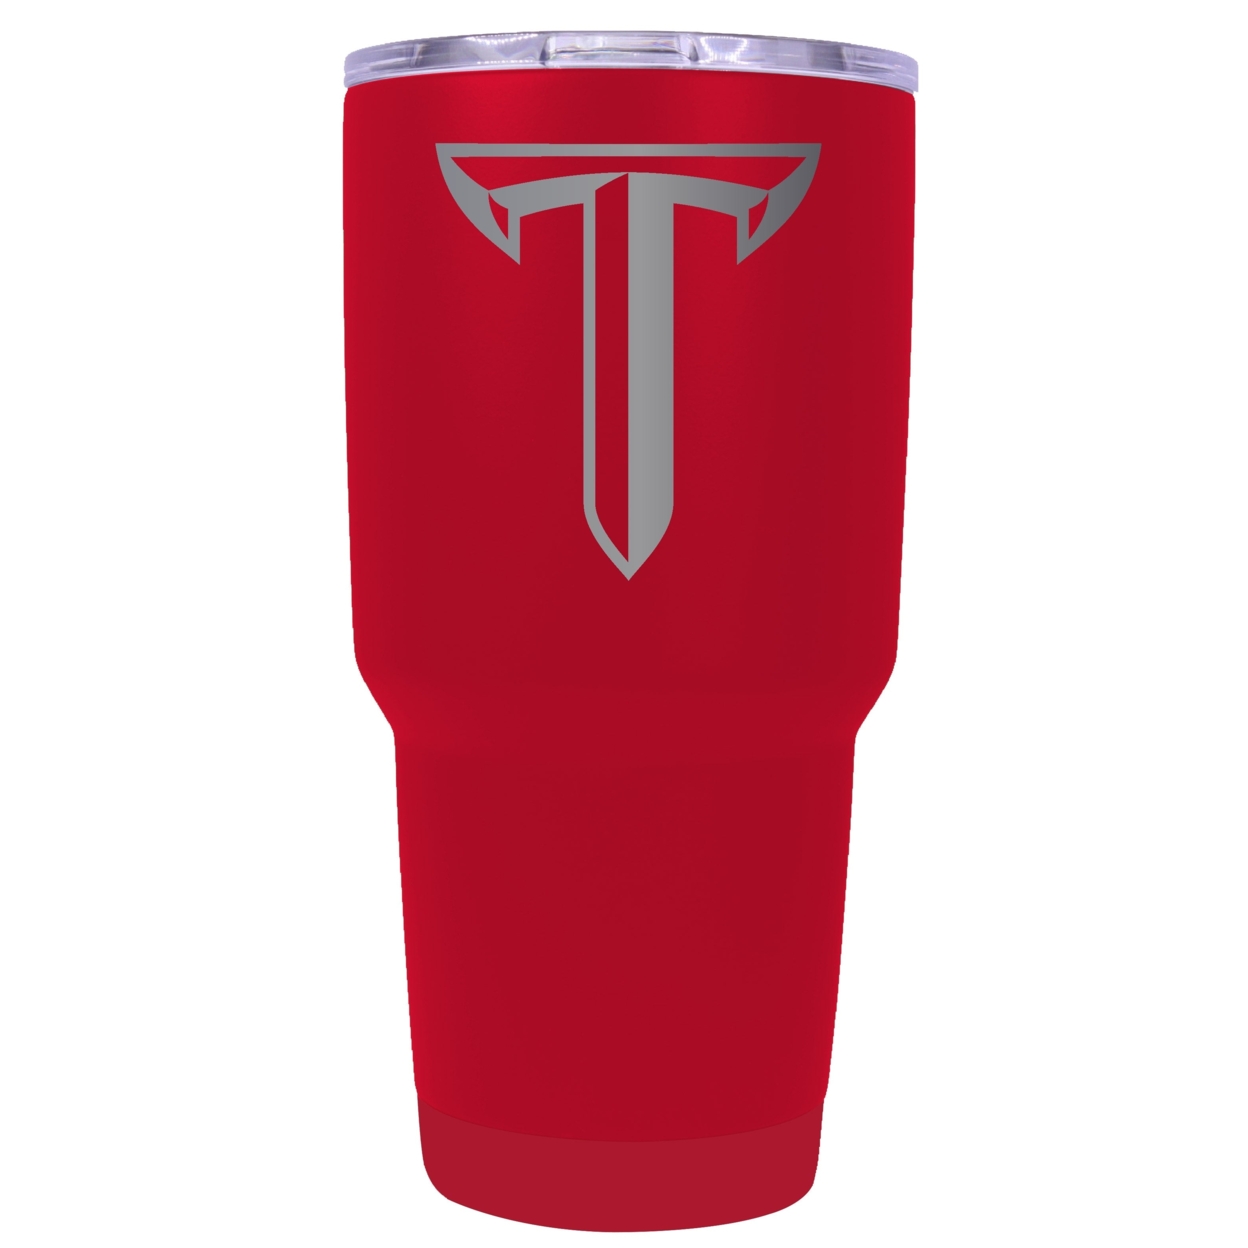 Troy University 24 Oz Laser Engraved Stainless Steel Insulated Tumbler - Choose Your Color. - Navy